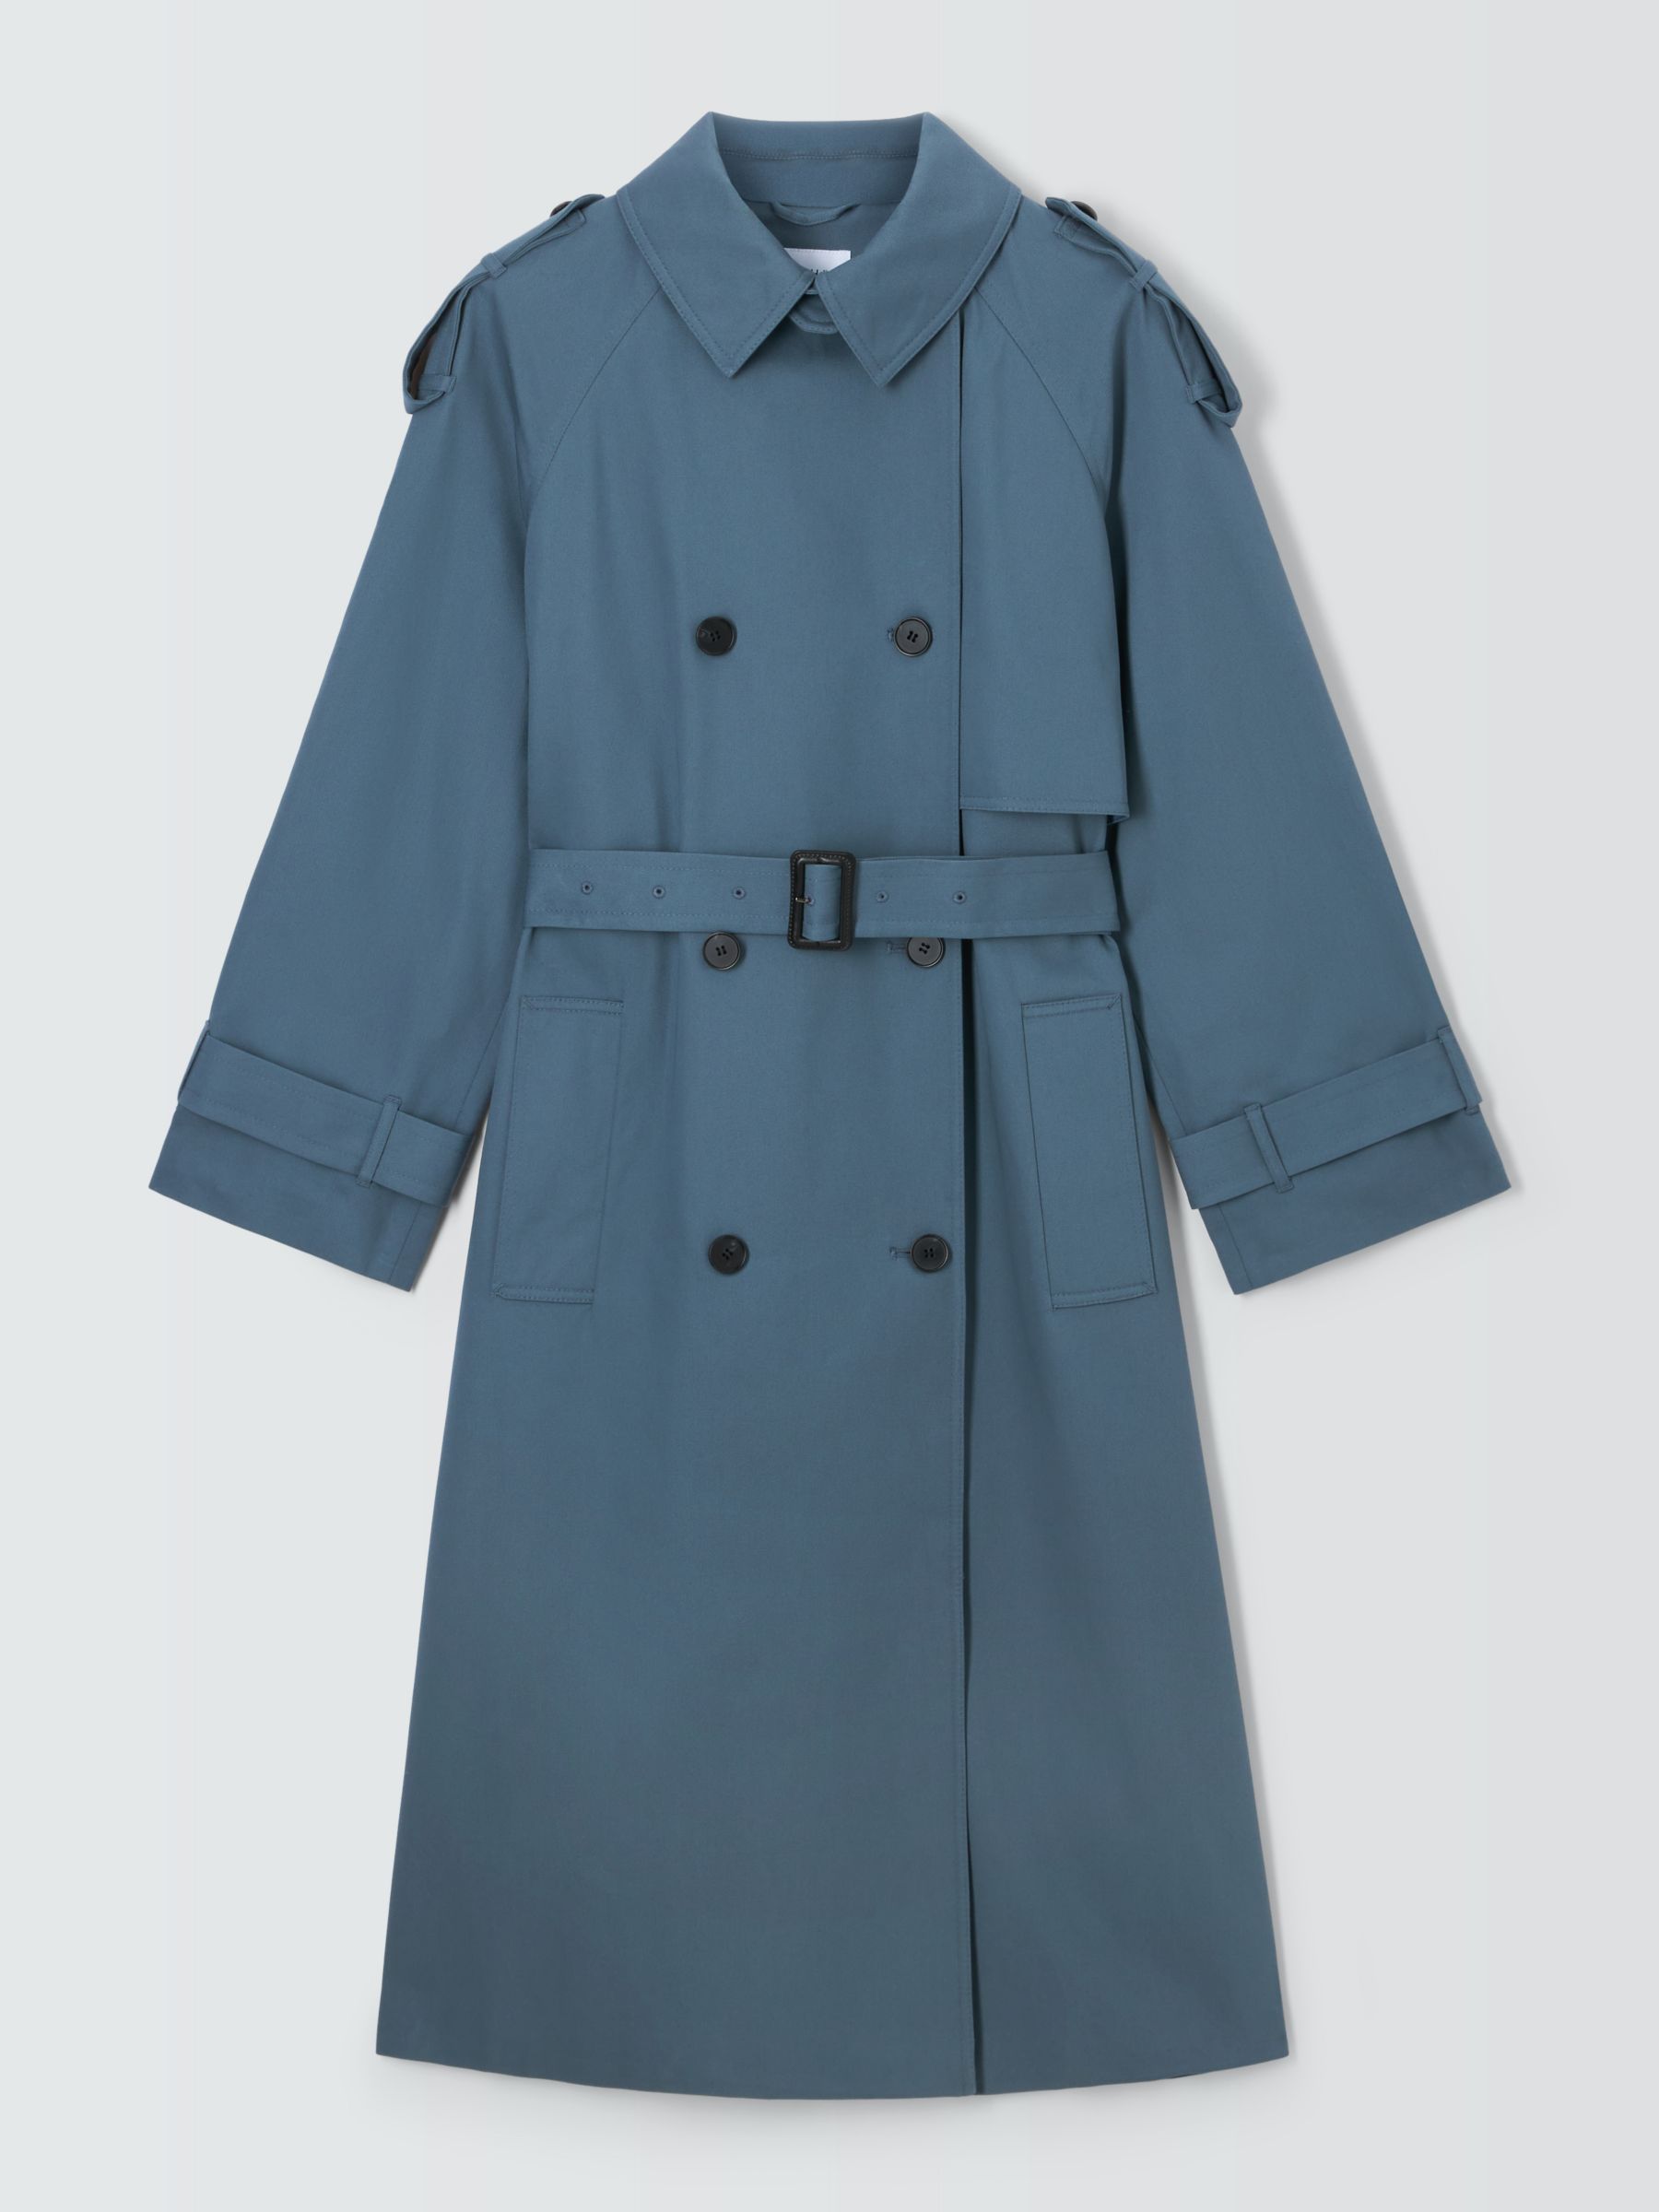 John Lewis Contemporary Trench Coat, Mid Blue, 10